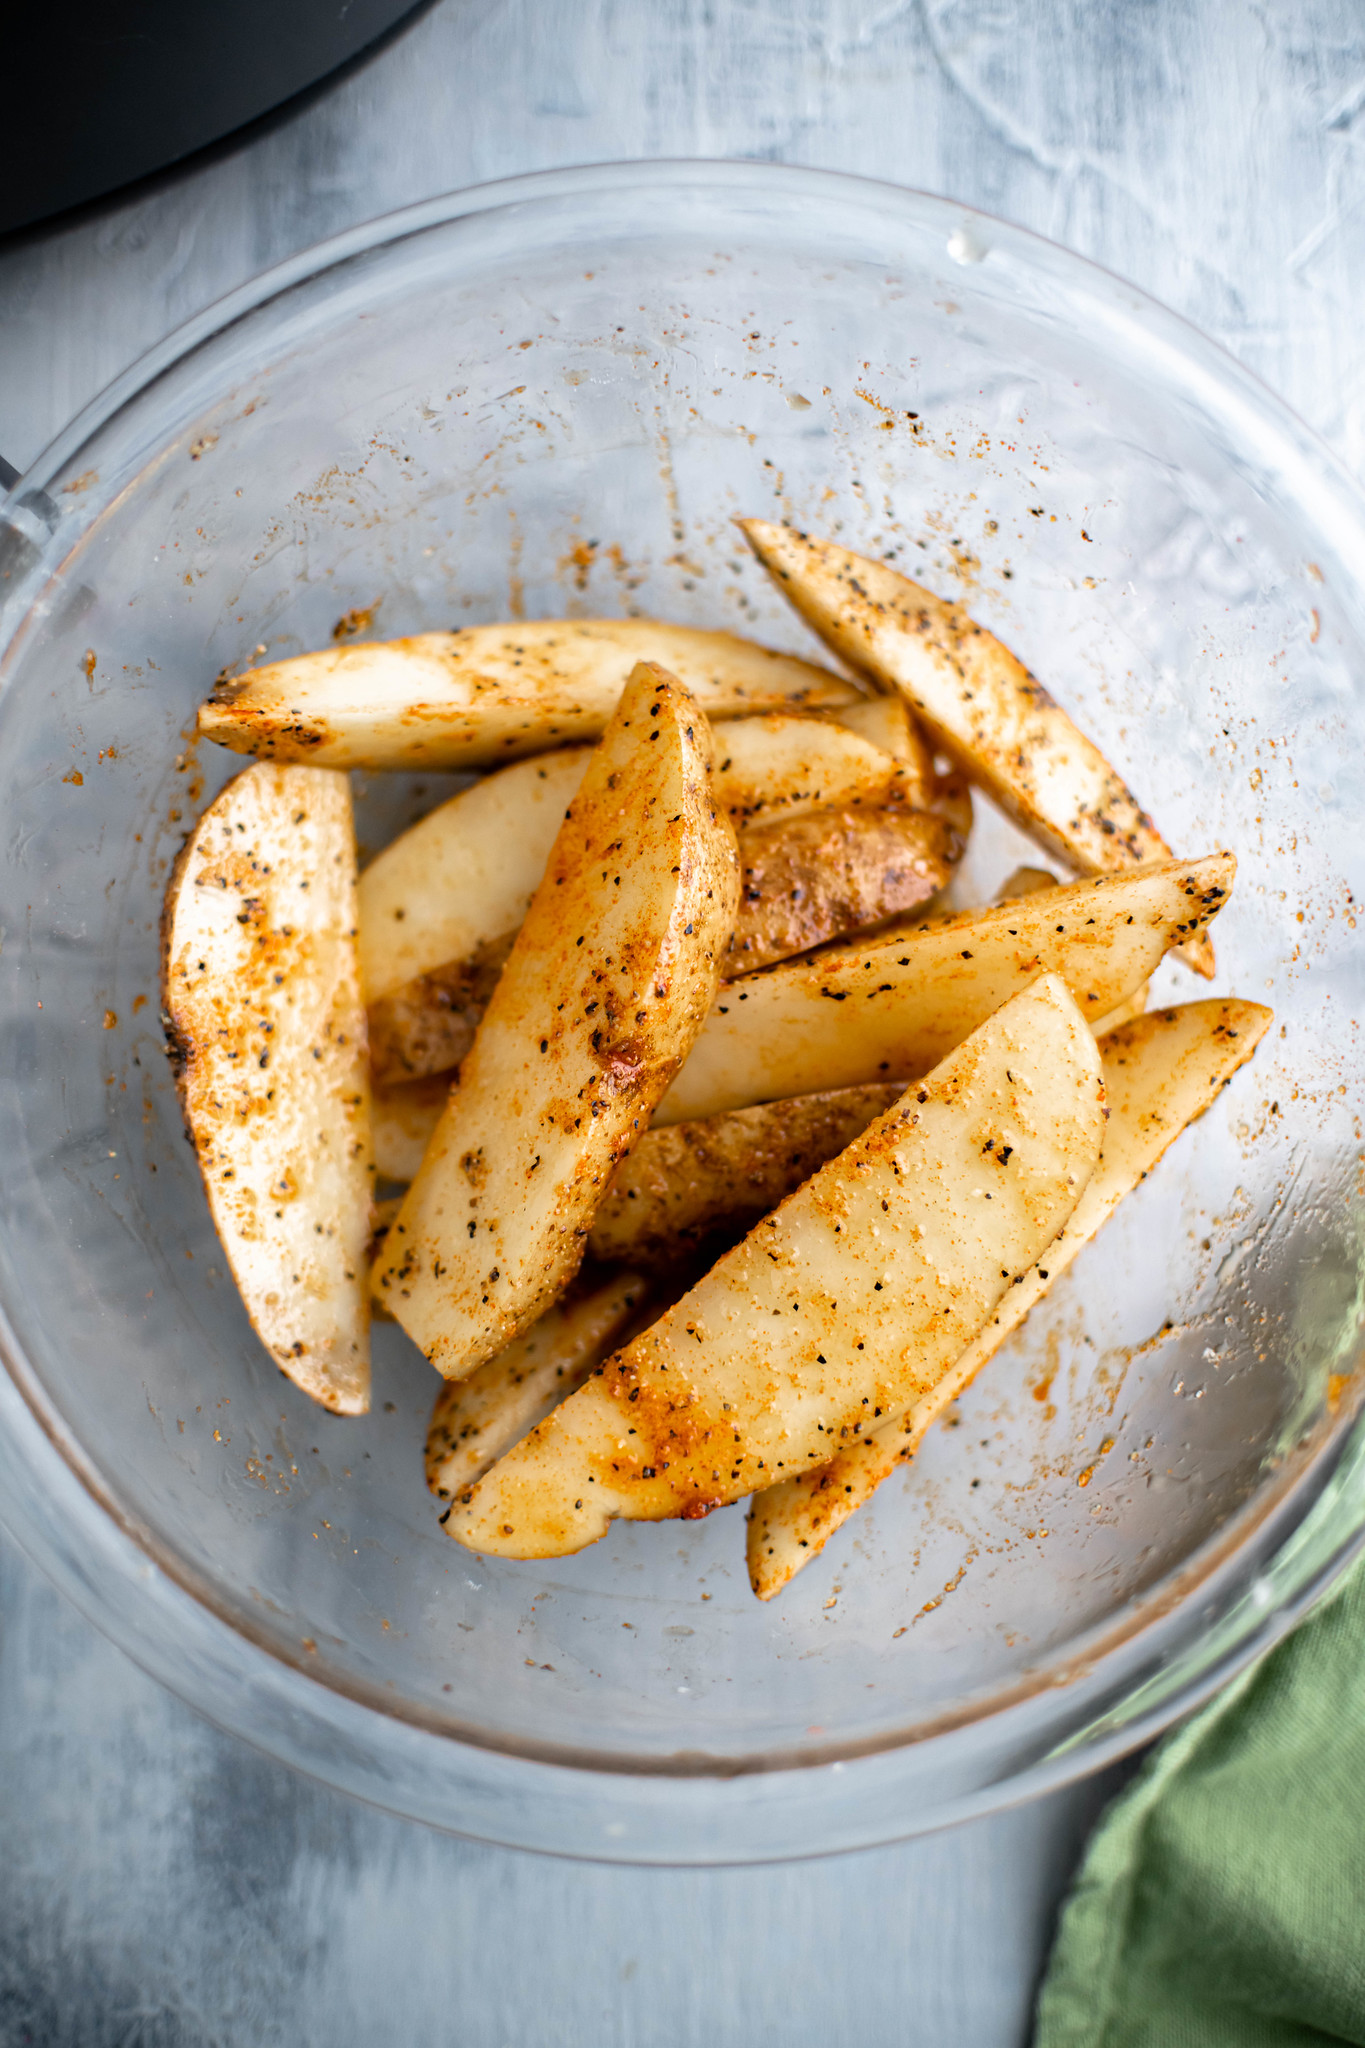 Potato wedges tossed in olive oil and spices in a glass bowl before being cooked.